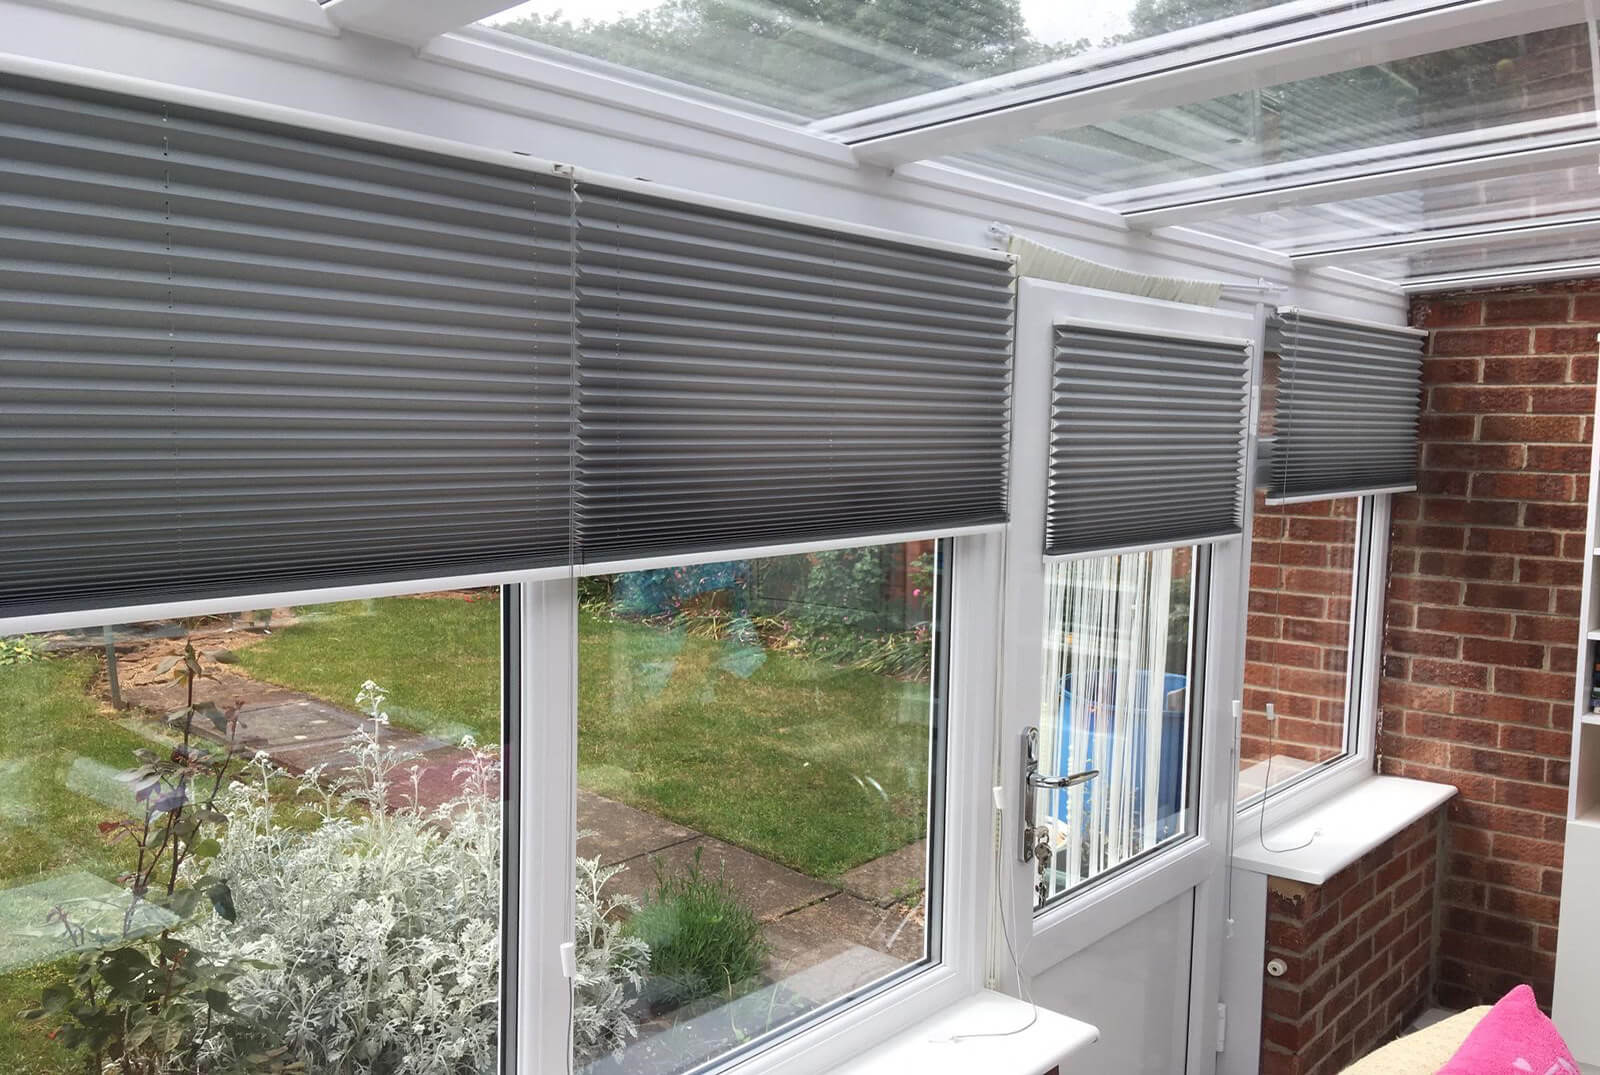 UK Suppliers of Neatly Folding Pleated Blinds